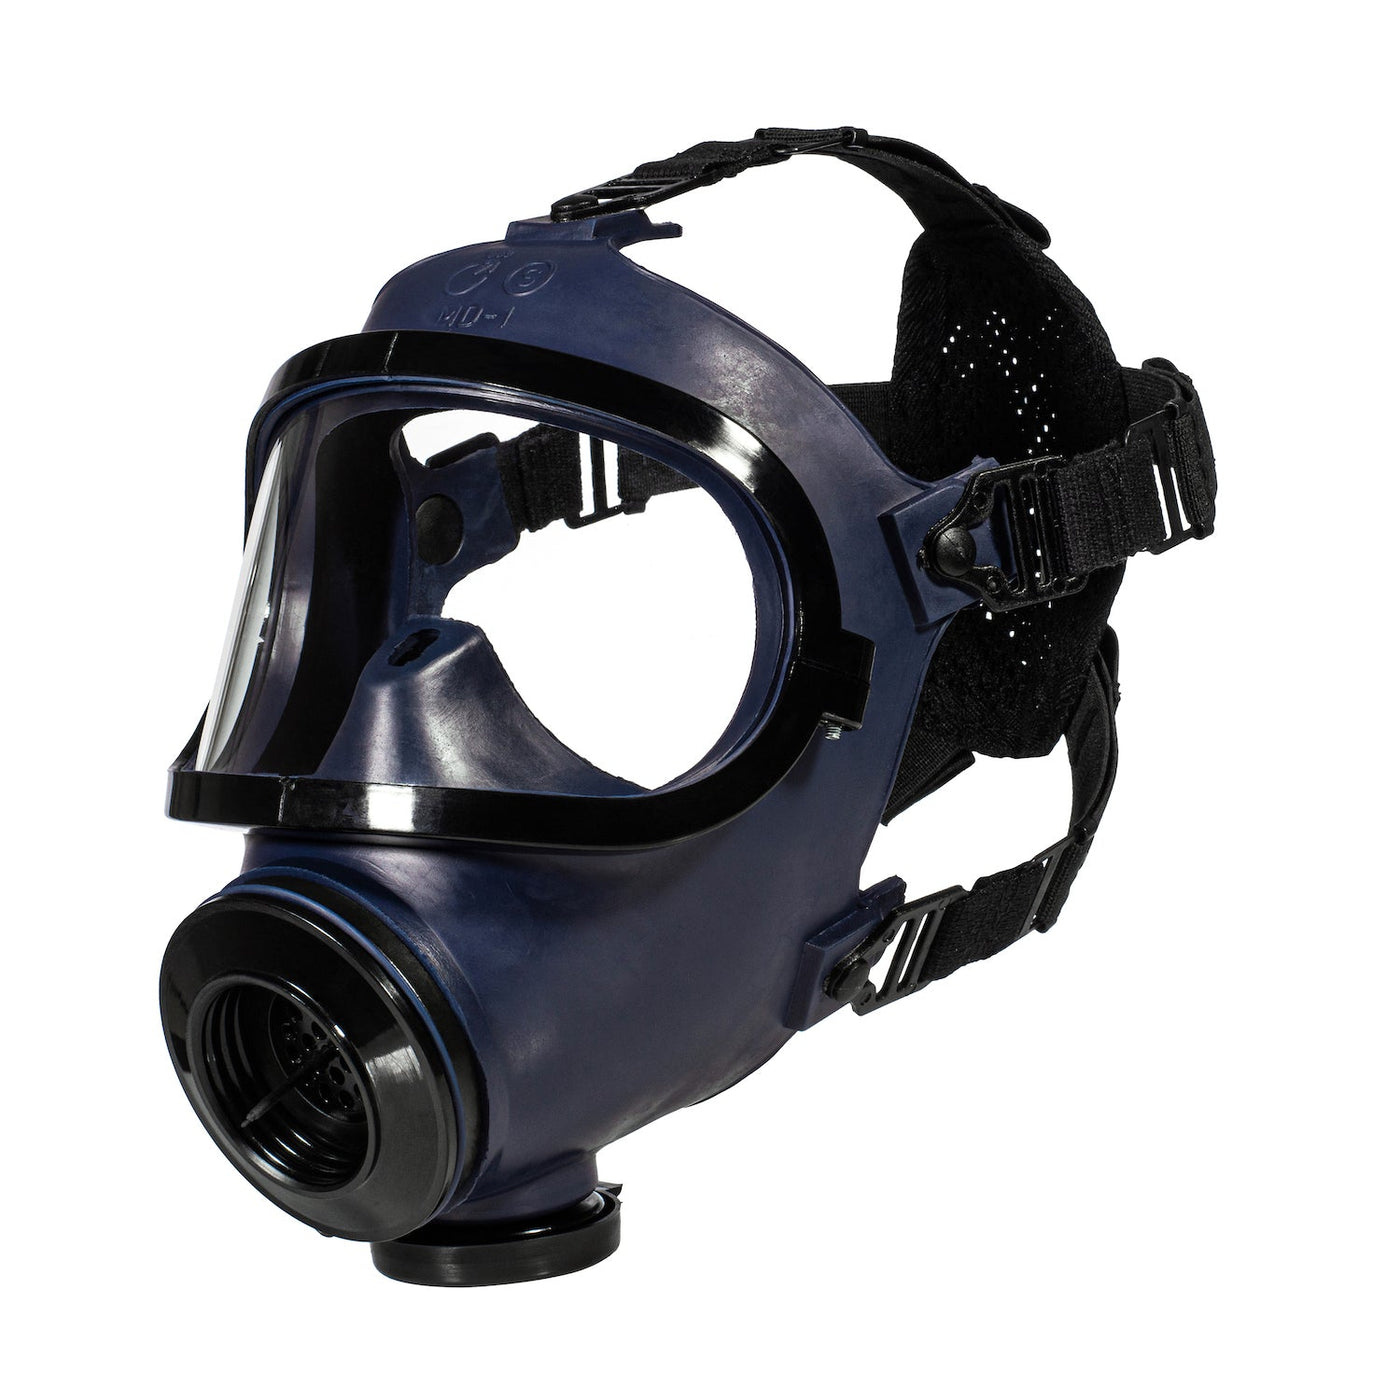 Left three quarter view of the kids gas mask kit on white background